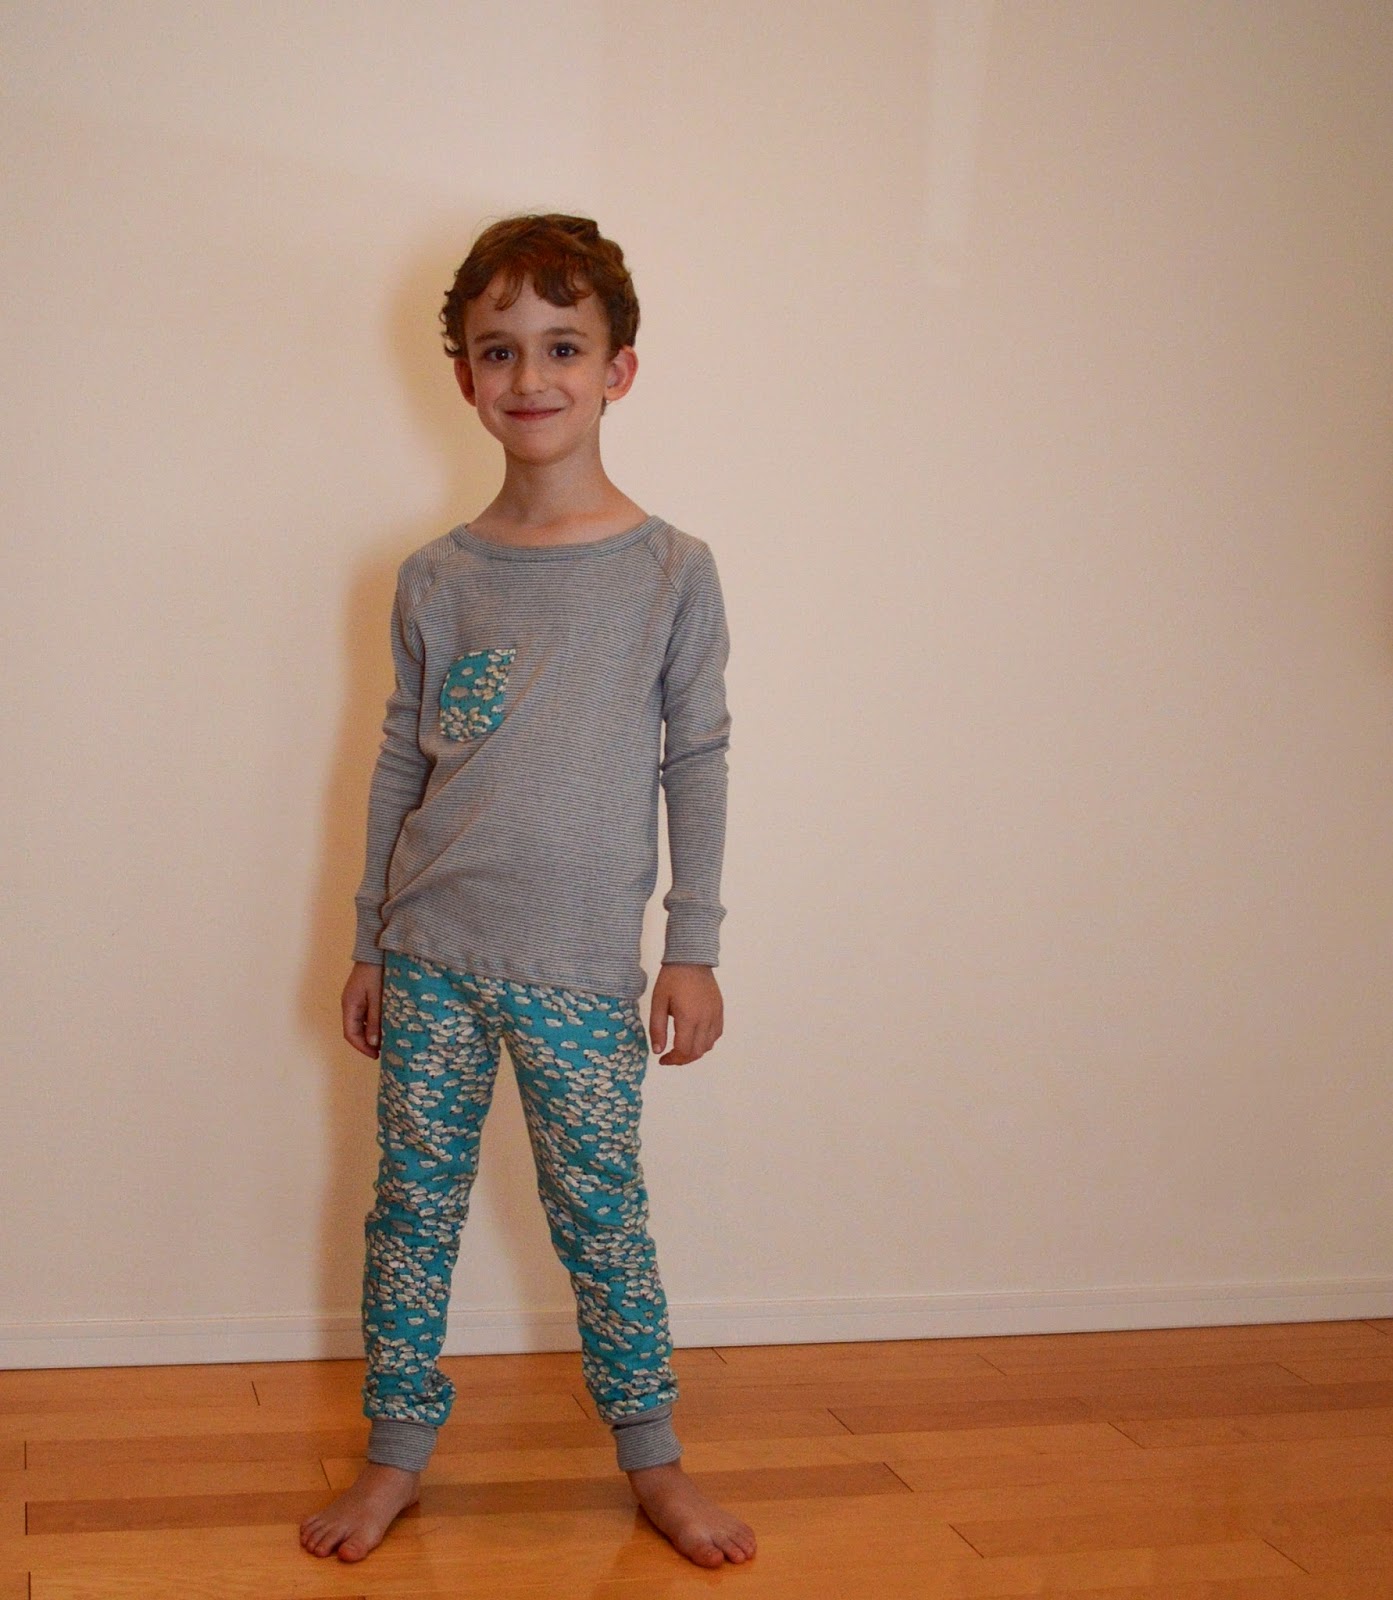 Beth Being Crafty: Flip This Pattern: Hosh Pants into PJ's